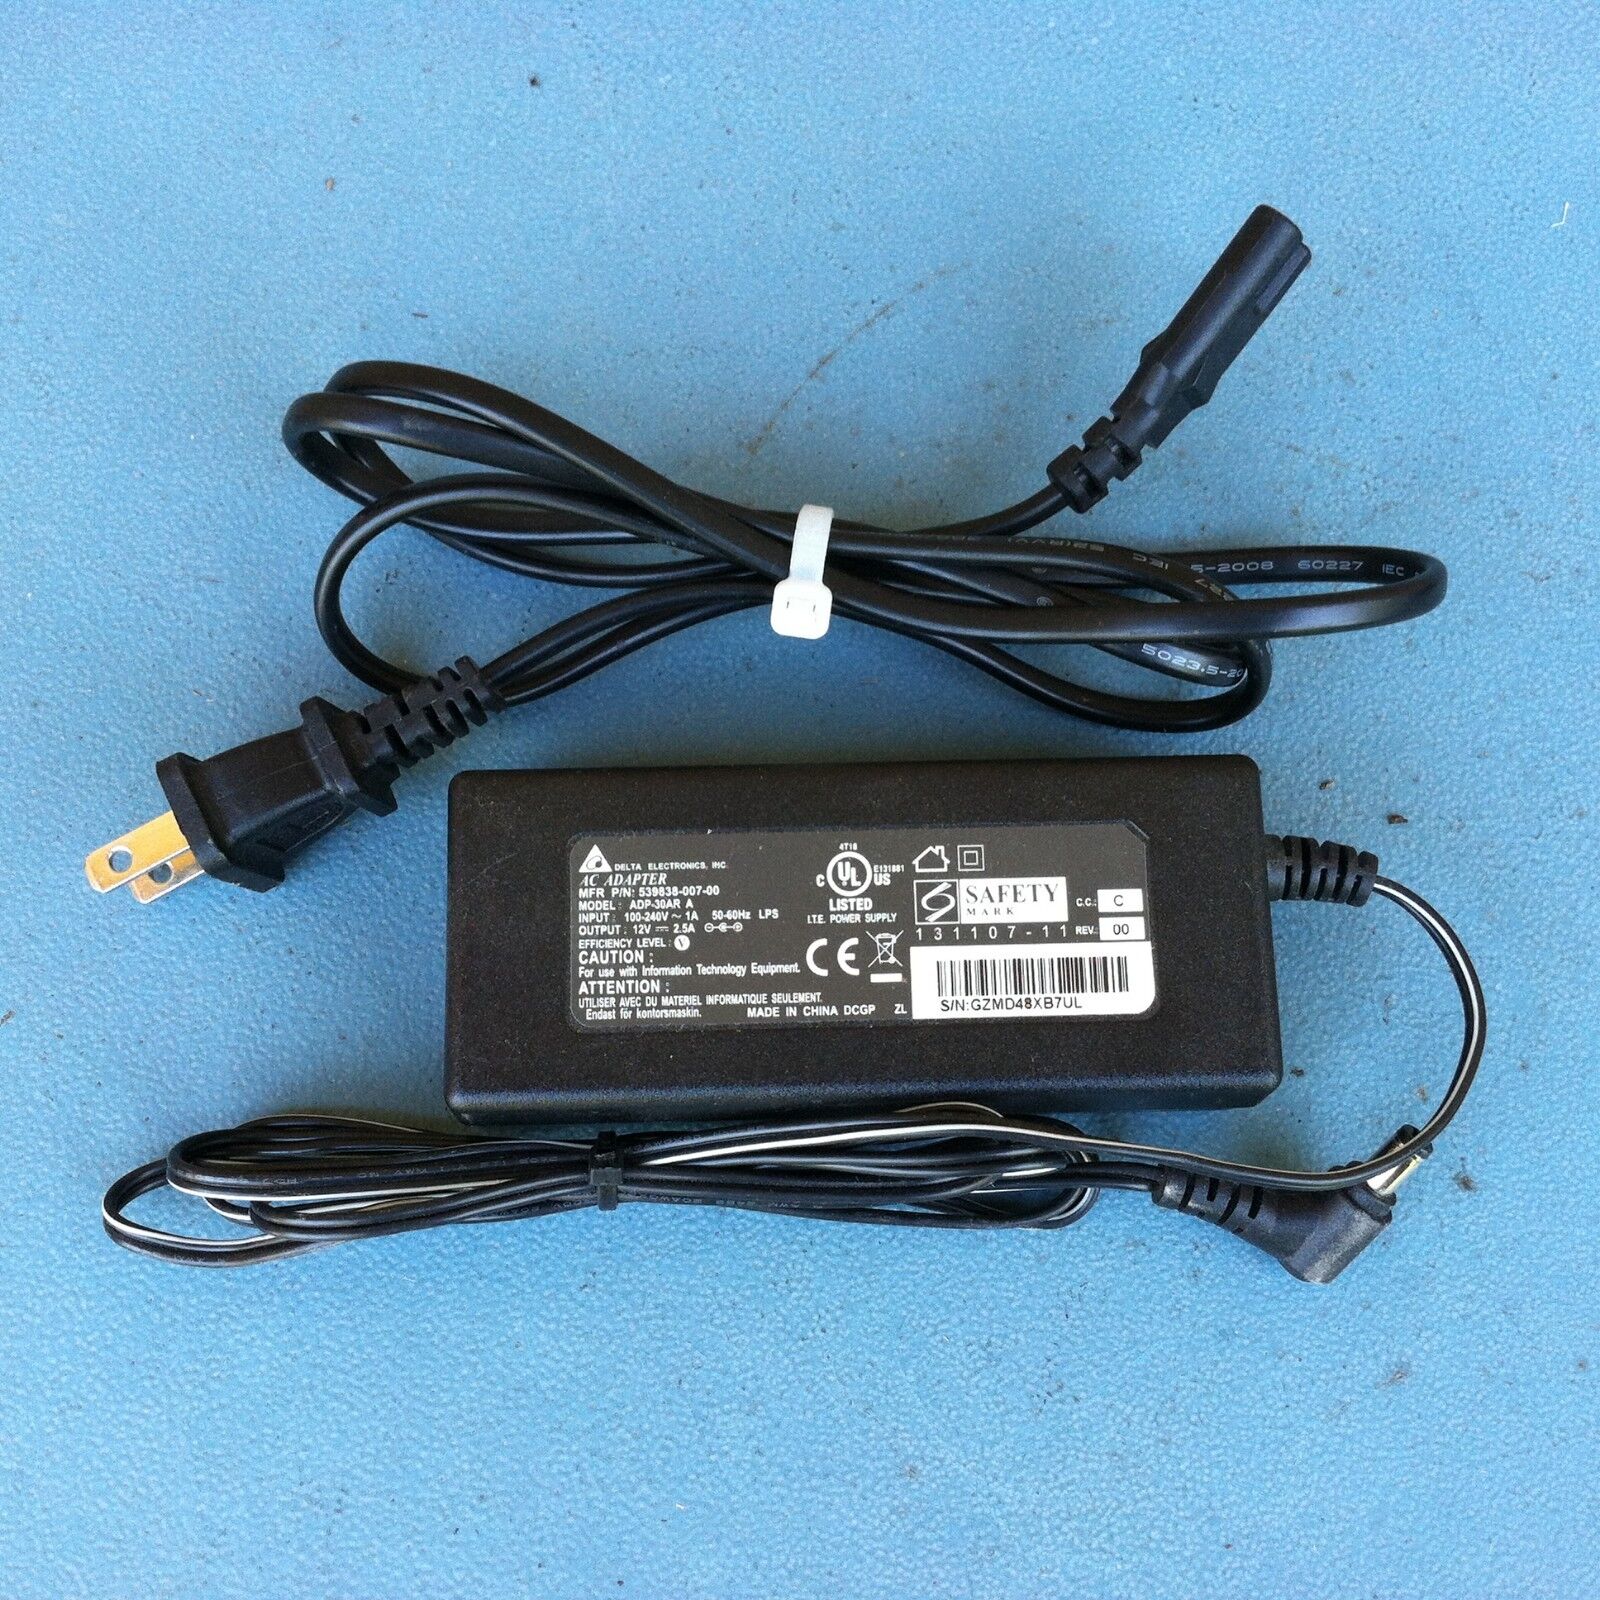 *Brand NEW*Delta Electronics ADP-40ZB 12V 3300mA AC/DC adapter g314 Power Supply